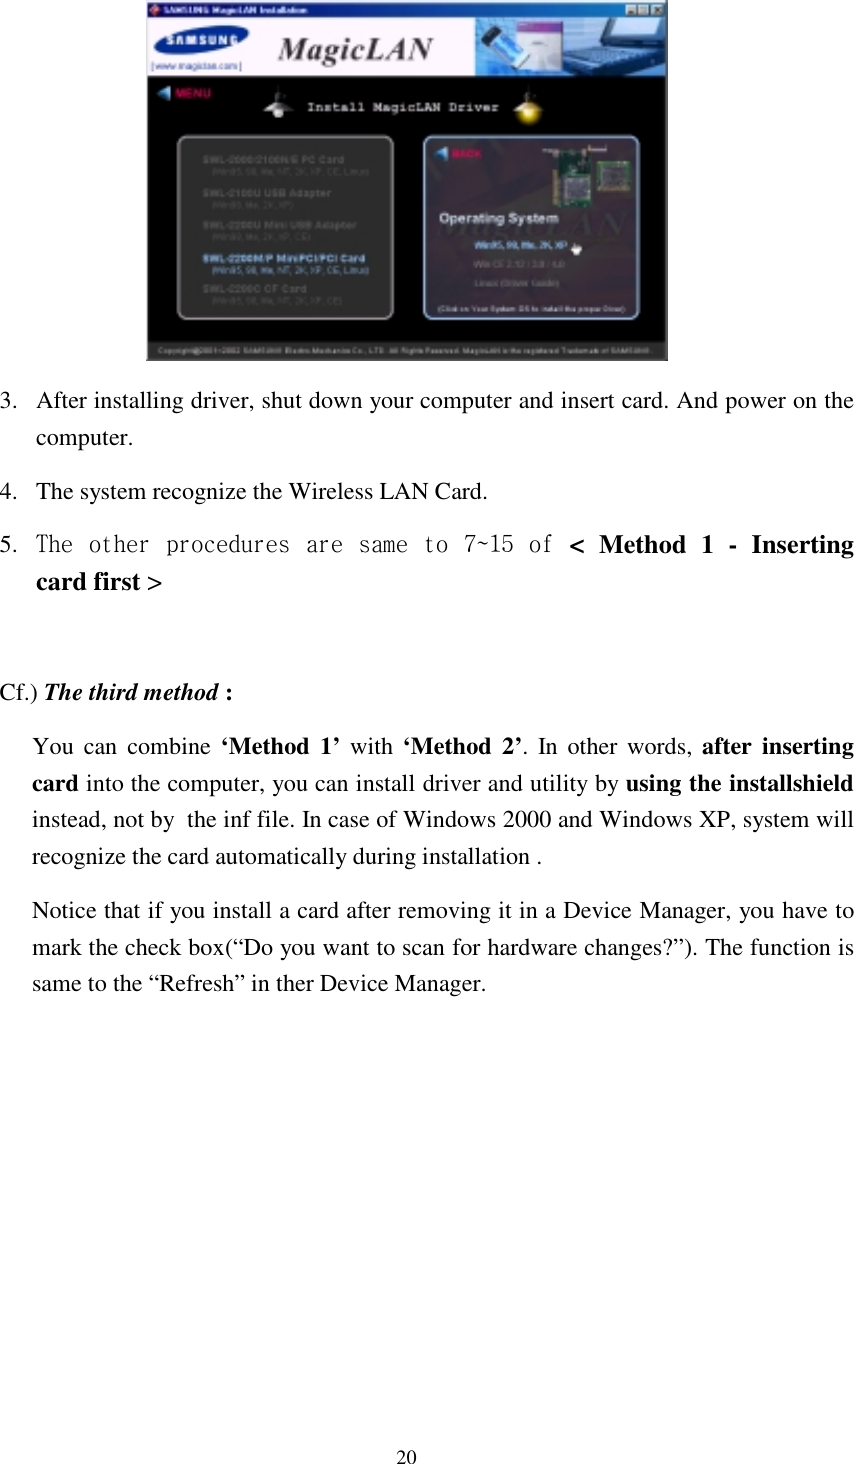  20  3.  After installing driver, shut down your computer and insert card. And power on the computer. 4.  The system recognize the Wireless LAN Card. 5.  The other procedures are same to 7~15 of &lt; Method 1 - Inserting card first &gt;   Cf.) The third method : You can combine ‘Method 1’ with ‘Method 2’. In other words, after inserting card into the computer, you can install driver and utility by using the installshield instead, not by  the inf file. In case of Windows 2000 and Windows XP, system will recognize the card automatically during installation .  Notice that if you install a card after removing it in a Device Manager, you have to mark the check box(“Do you want to scan for hardware changes?”). The function is same to the “Refresh” in ther Device Manager.             